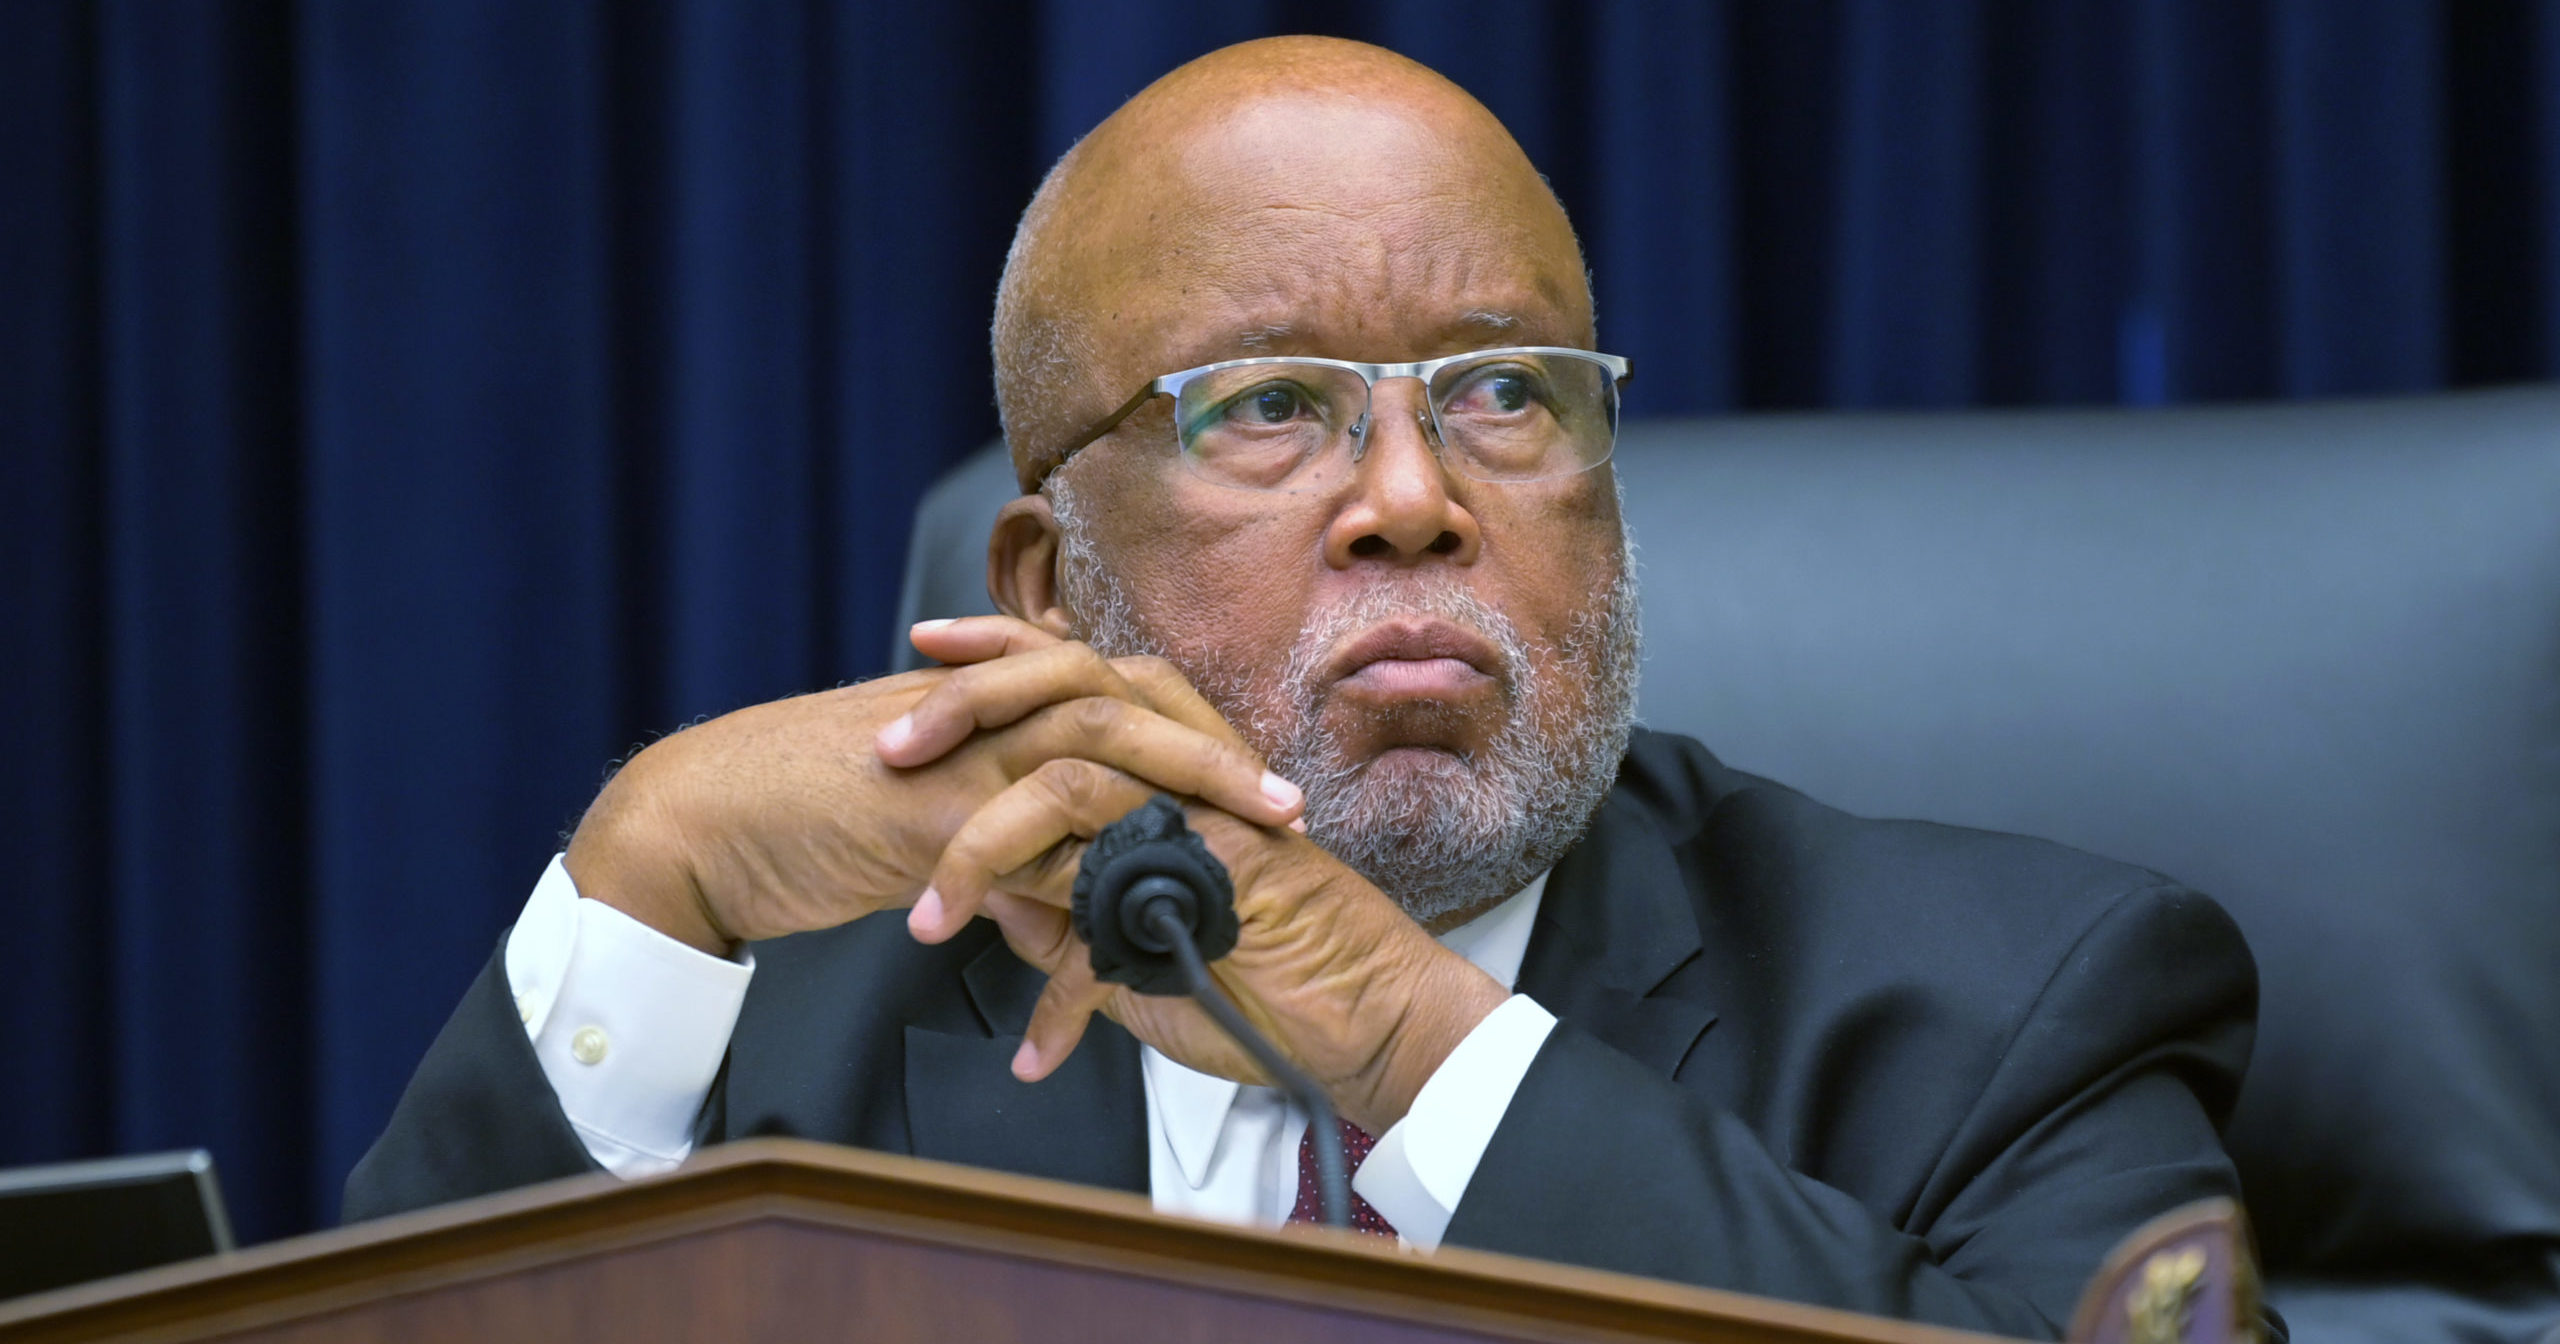 Rep. Bennie Thompson of Mississippi speaks during a House Committee on Homeland Security hearing on Capitol Hill in Washington, D.C., on Sept. 17, 2020.